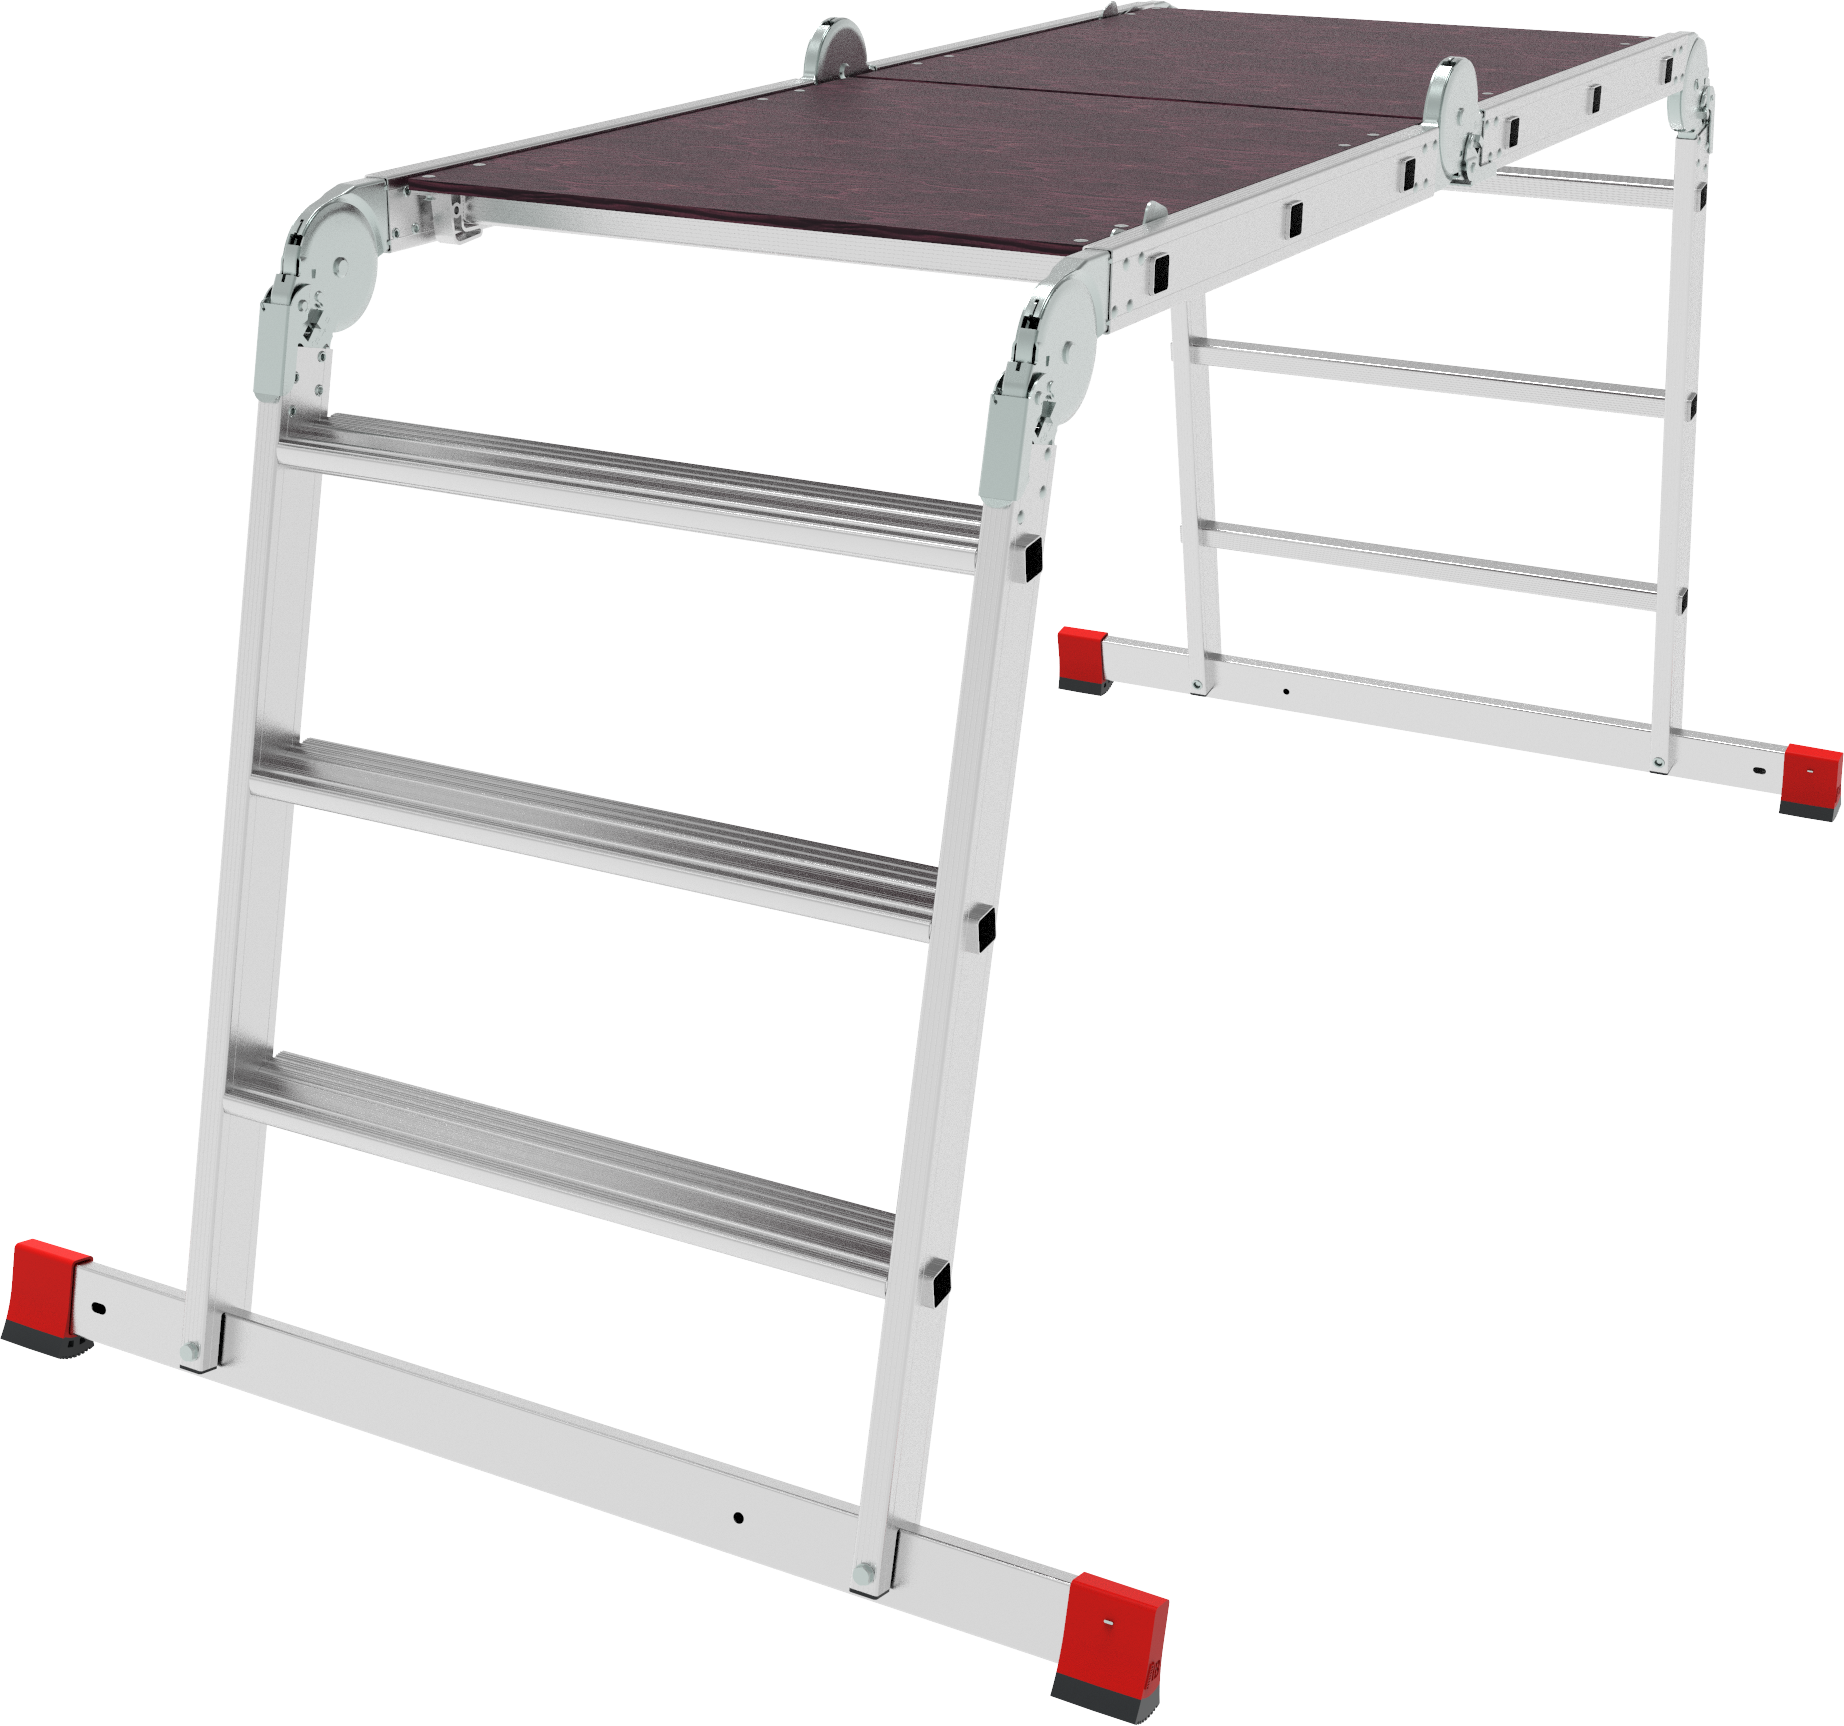 Multipurpose aluminum professional hinged rung ladder 650 mm width with 80 mm flanged steps and platform NV3335